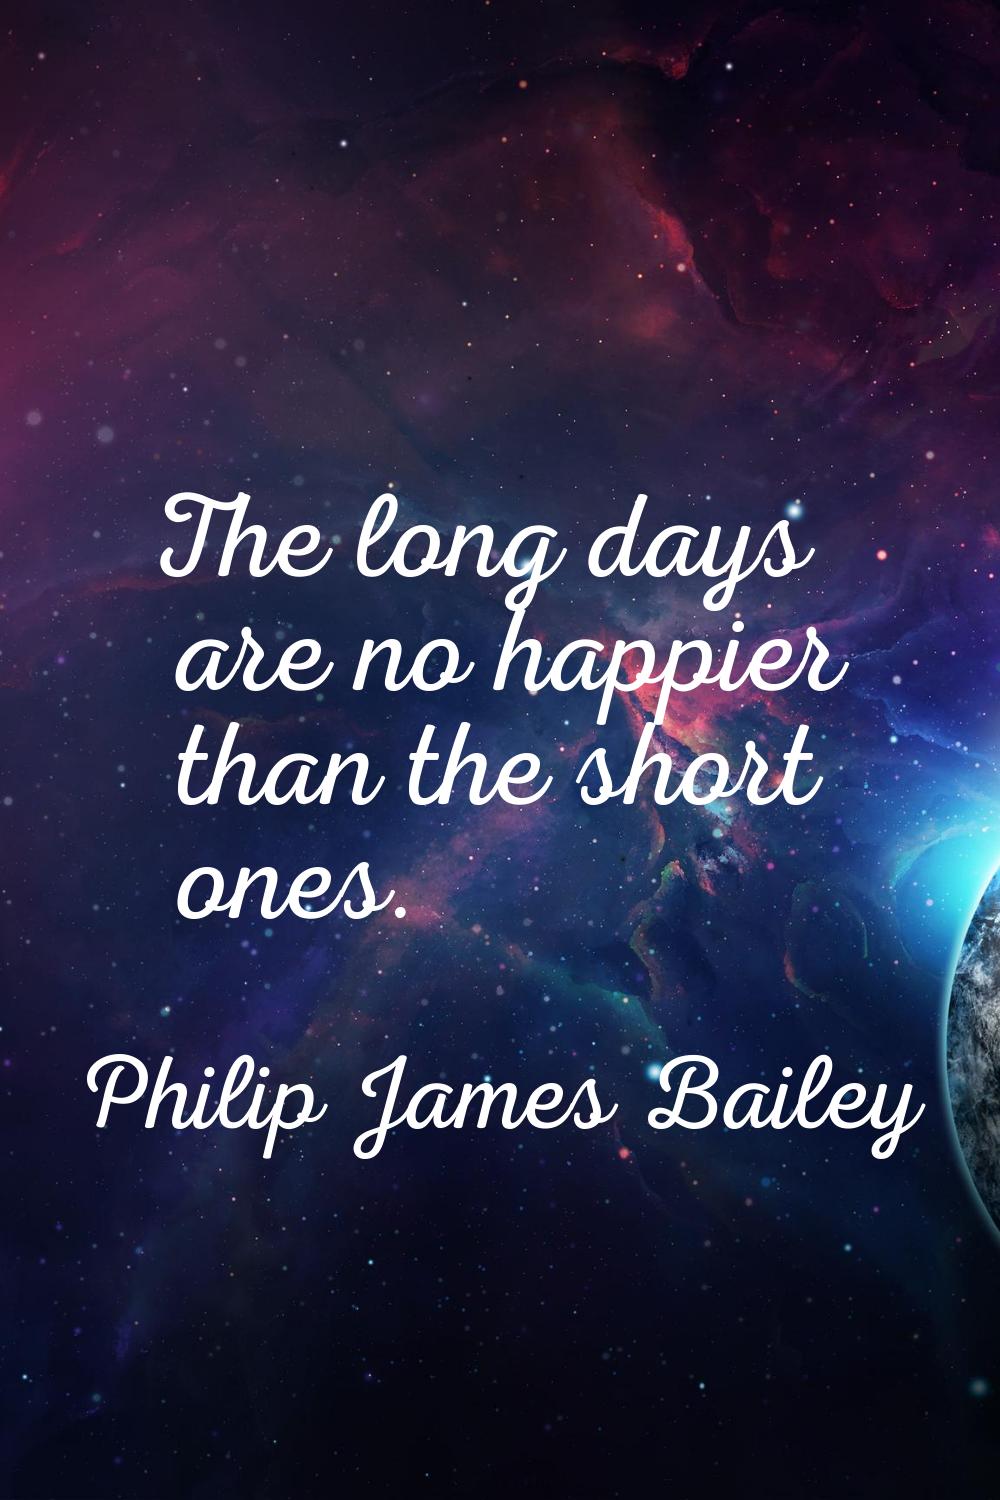 The long days are no happier than the short ones.